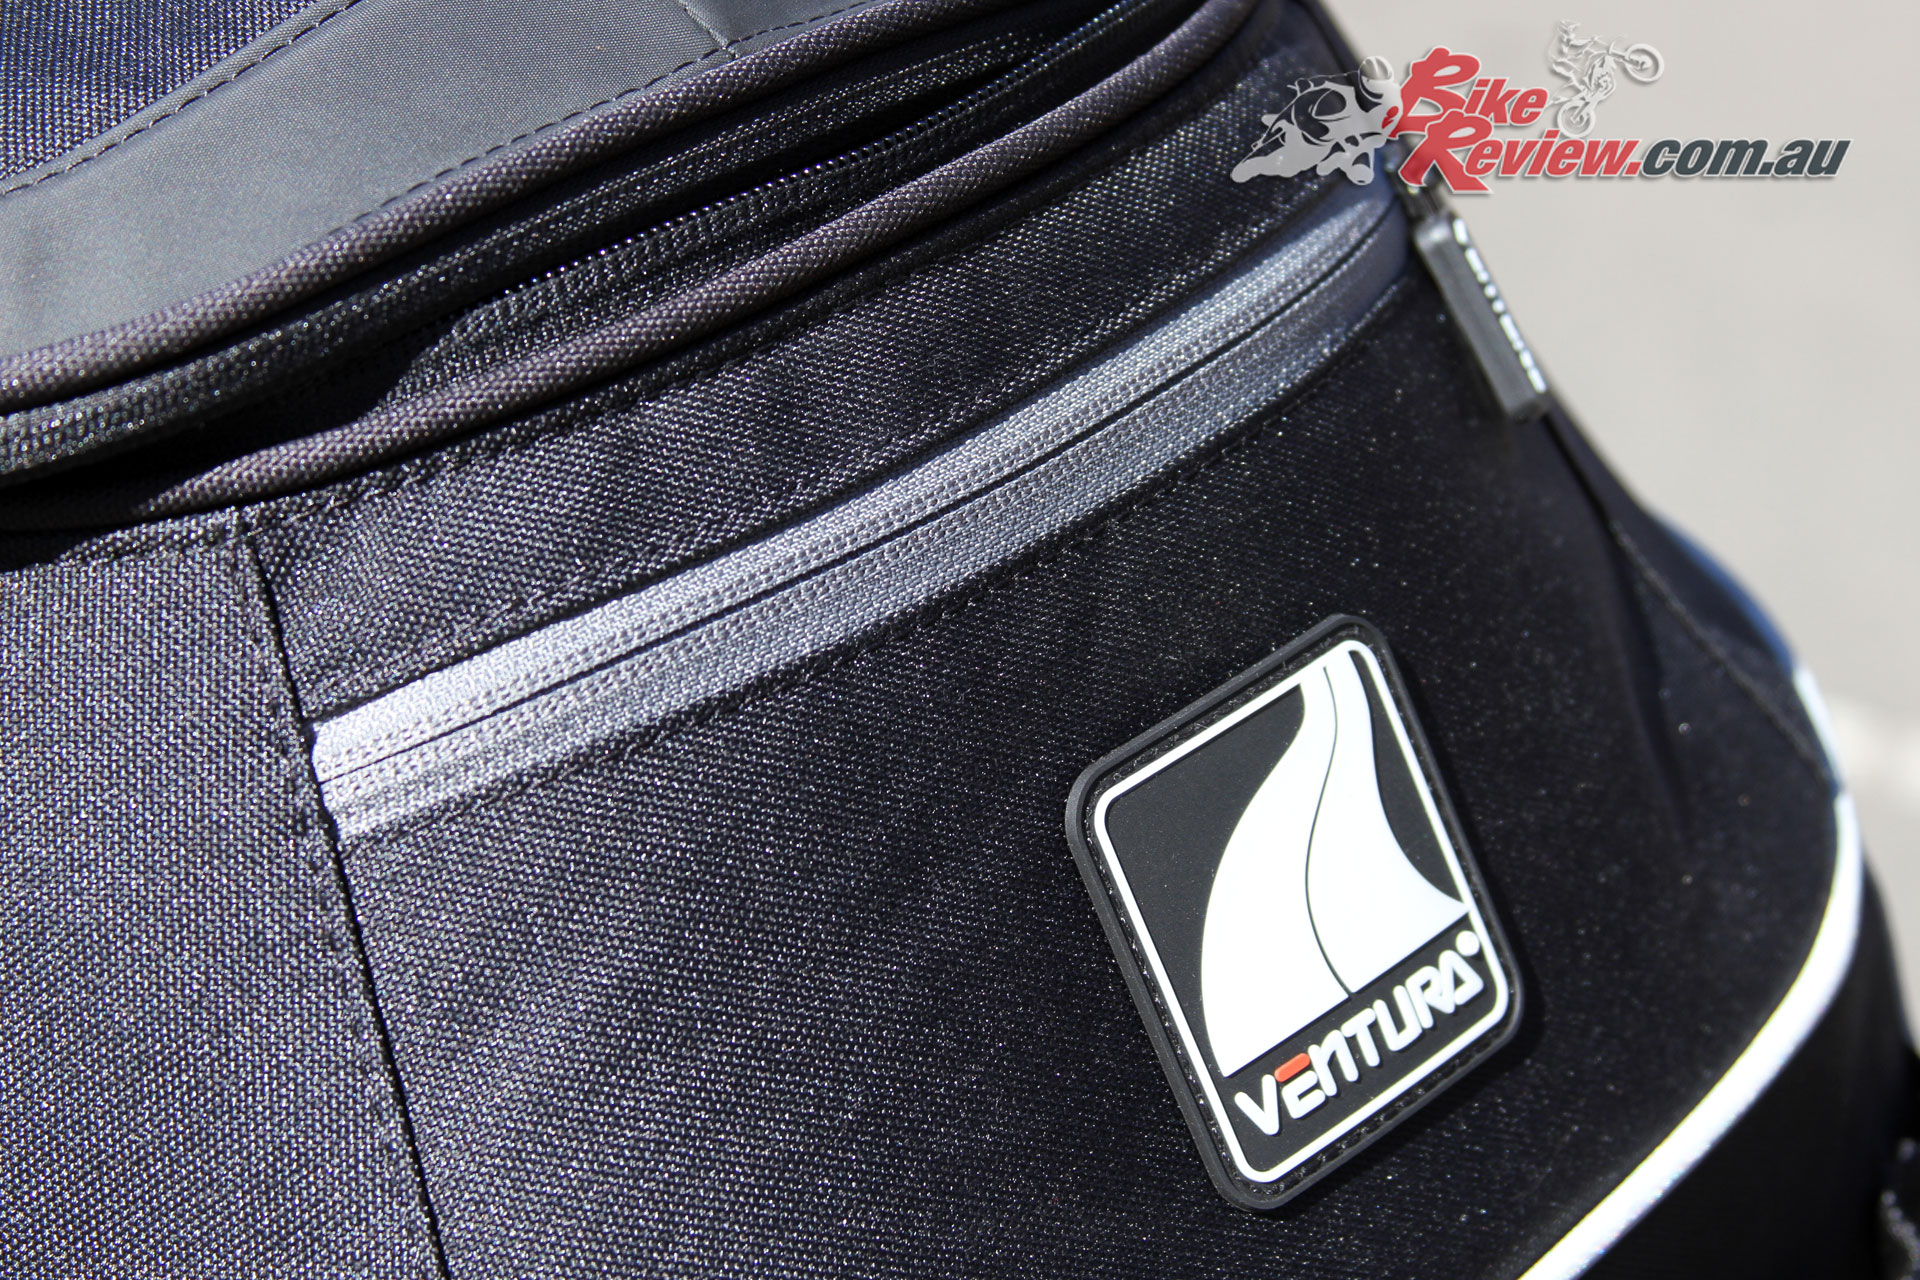 A rear pocket offers easy storage and access to small items on the EVO-22 bag